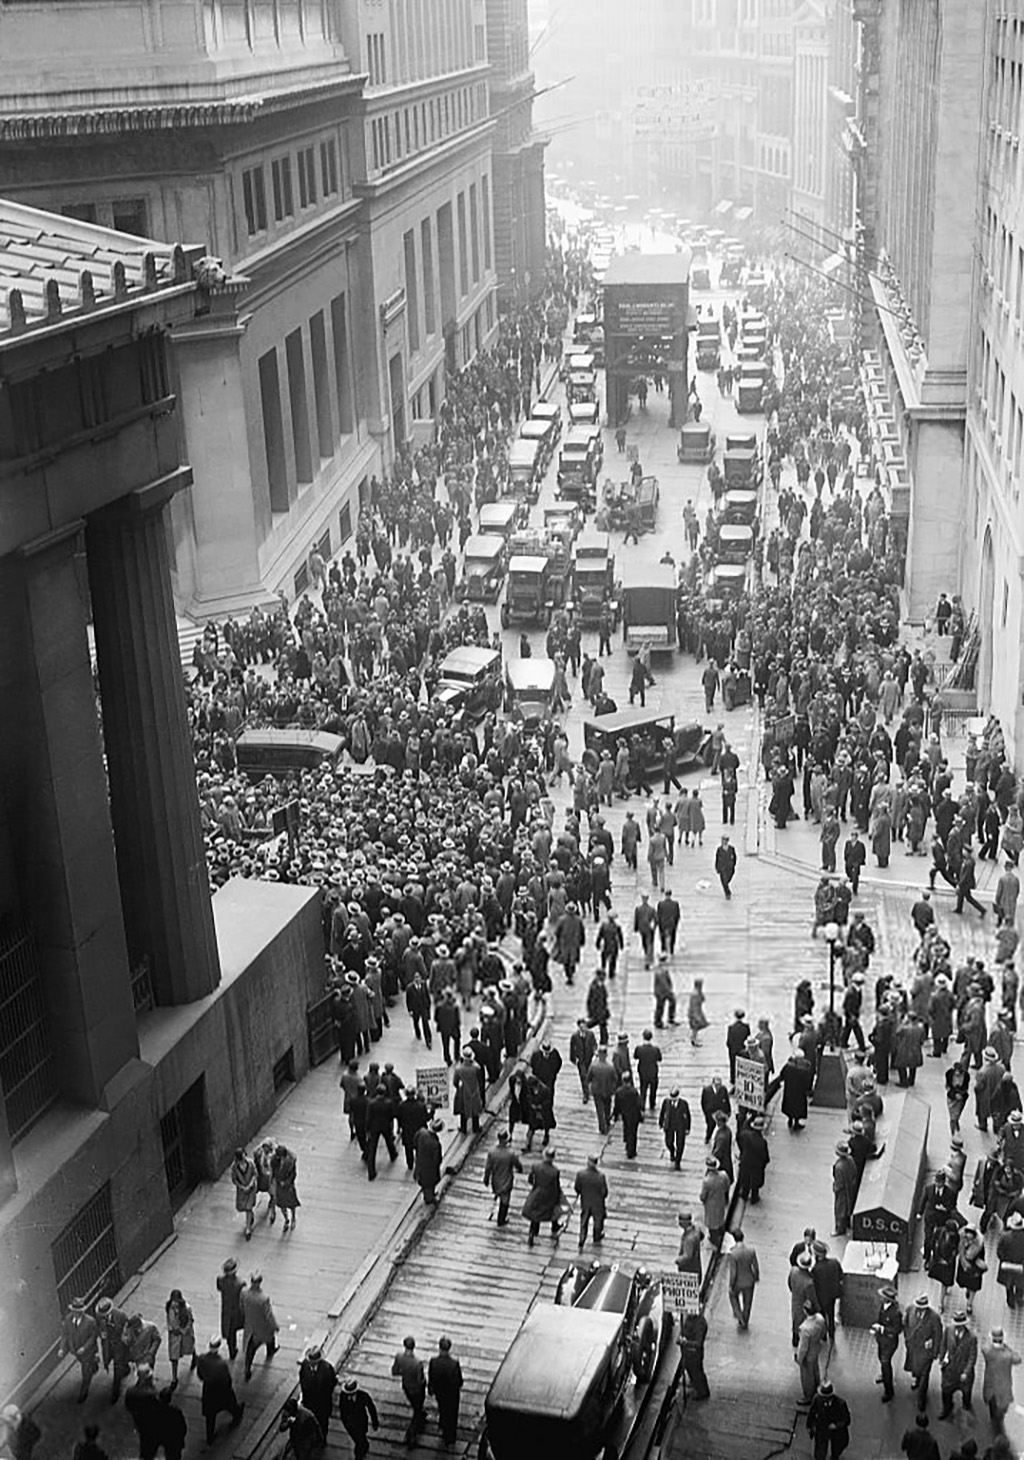 Crowd gathering on Wall Street after the 1929 crash